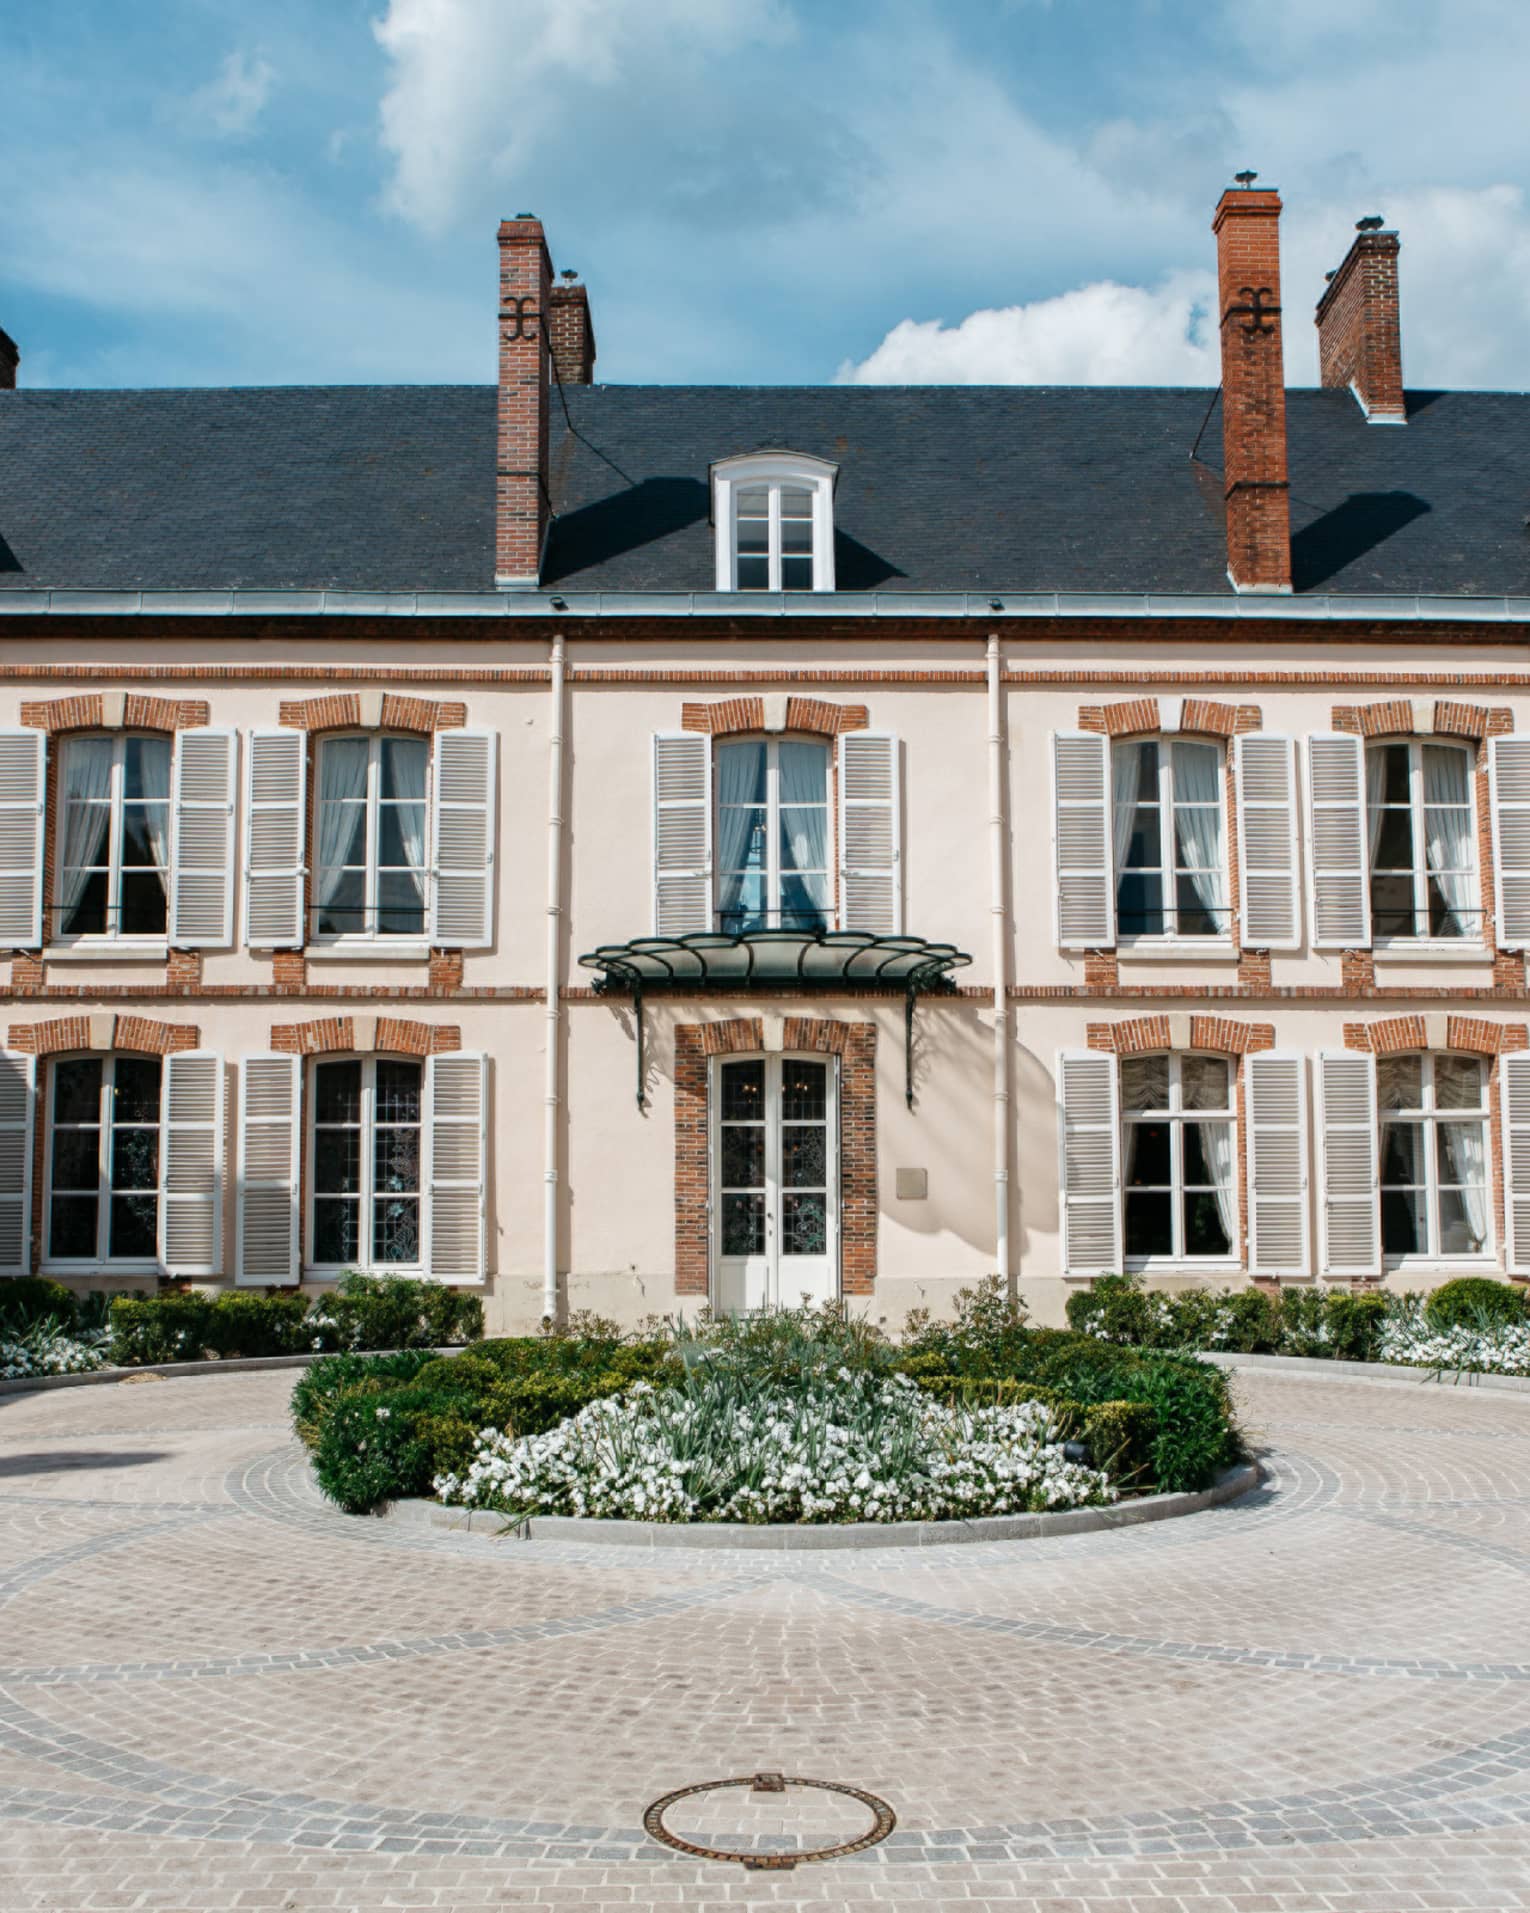 Rear courtyard view of the Maison Belle �poque 19th-century mansion